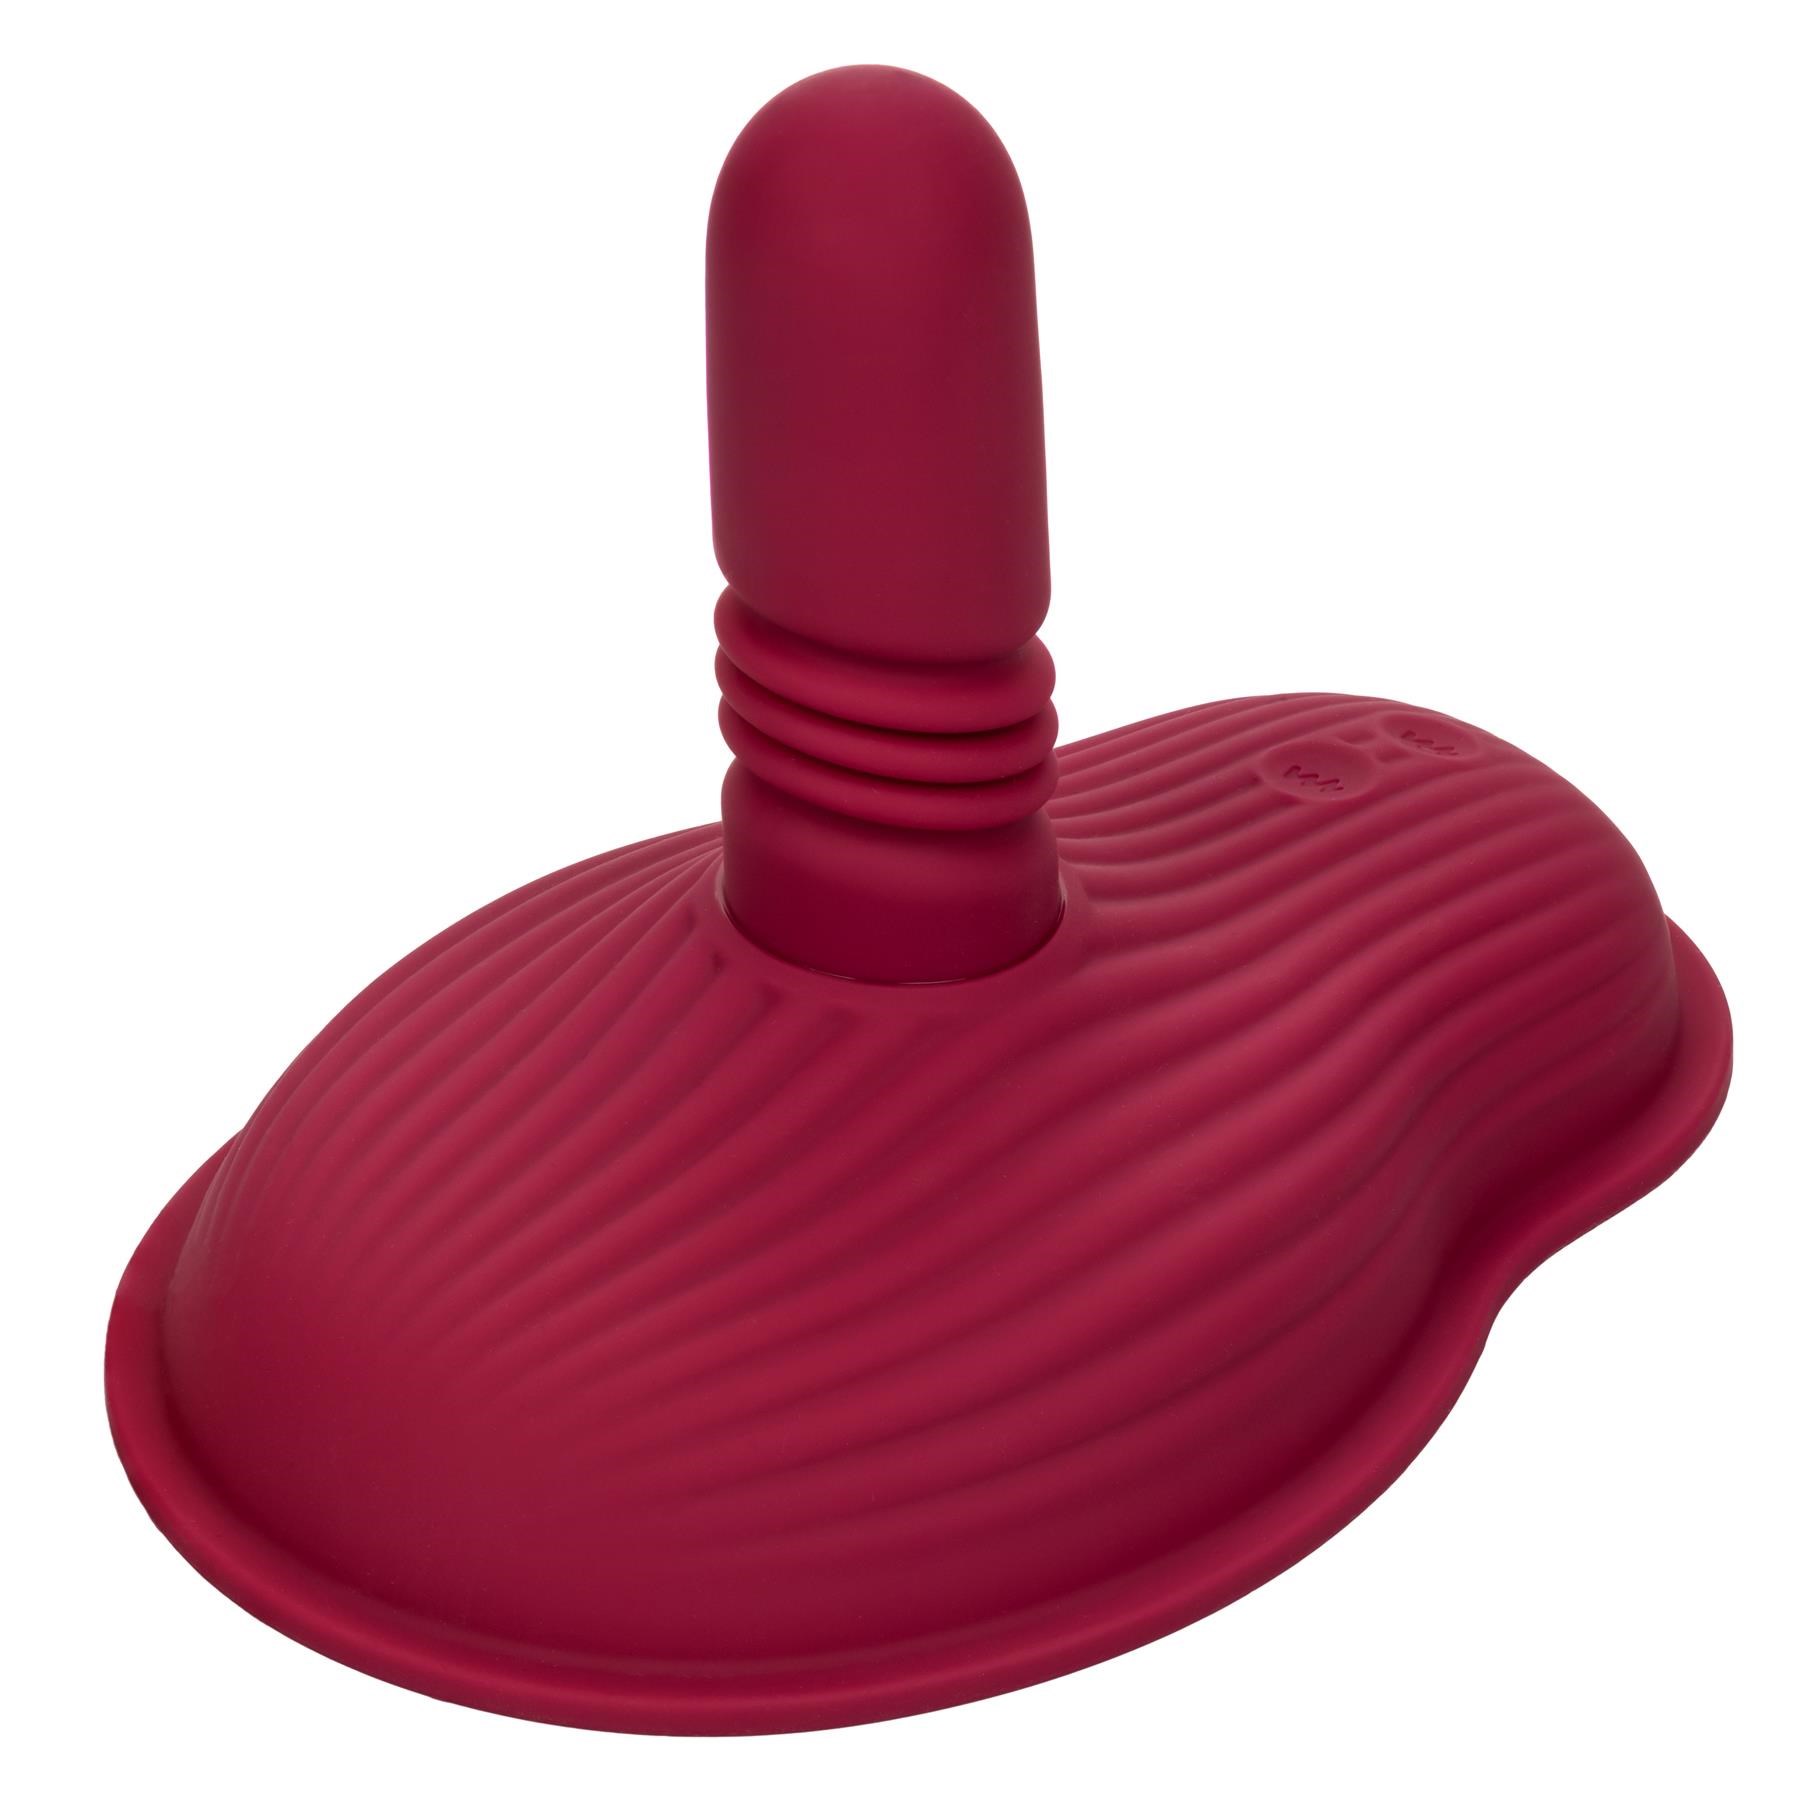 Dual Rider Thrust And Grind Vibrator - Product Shot #1